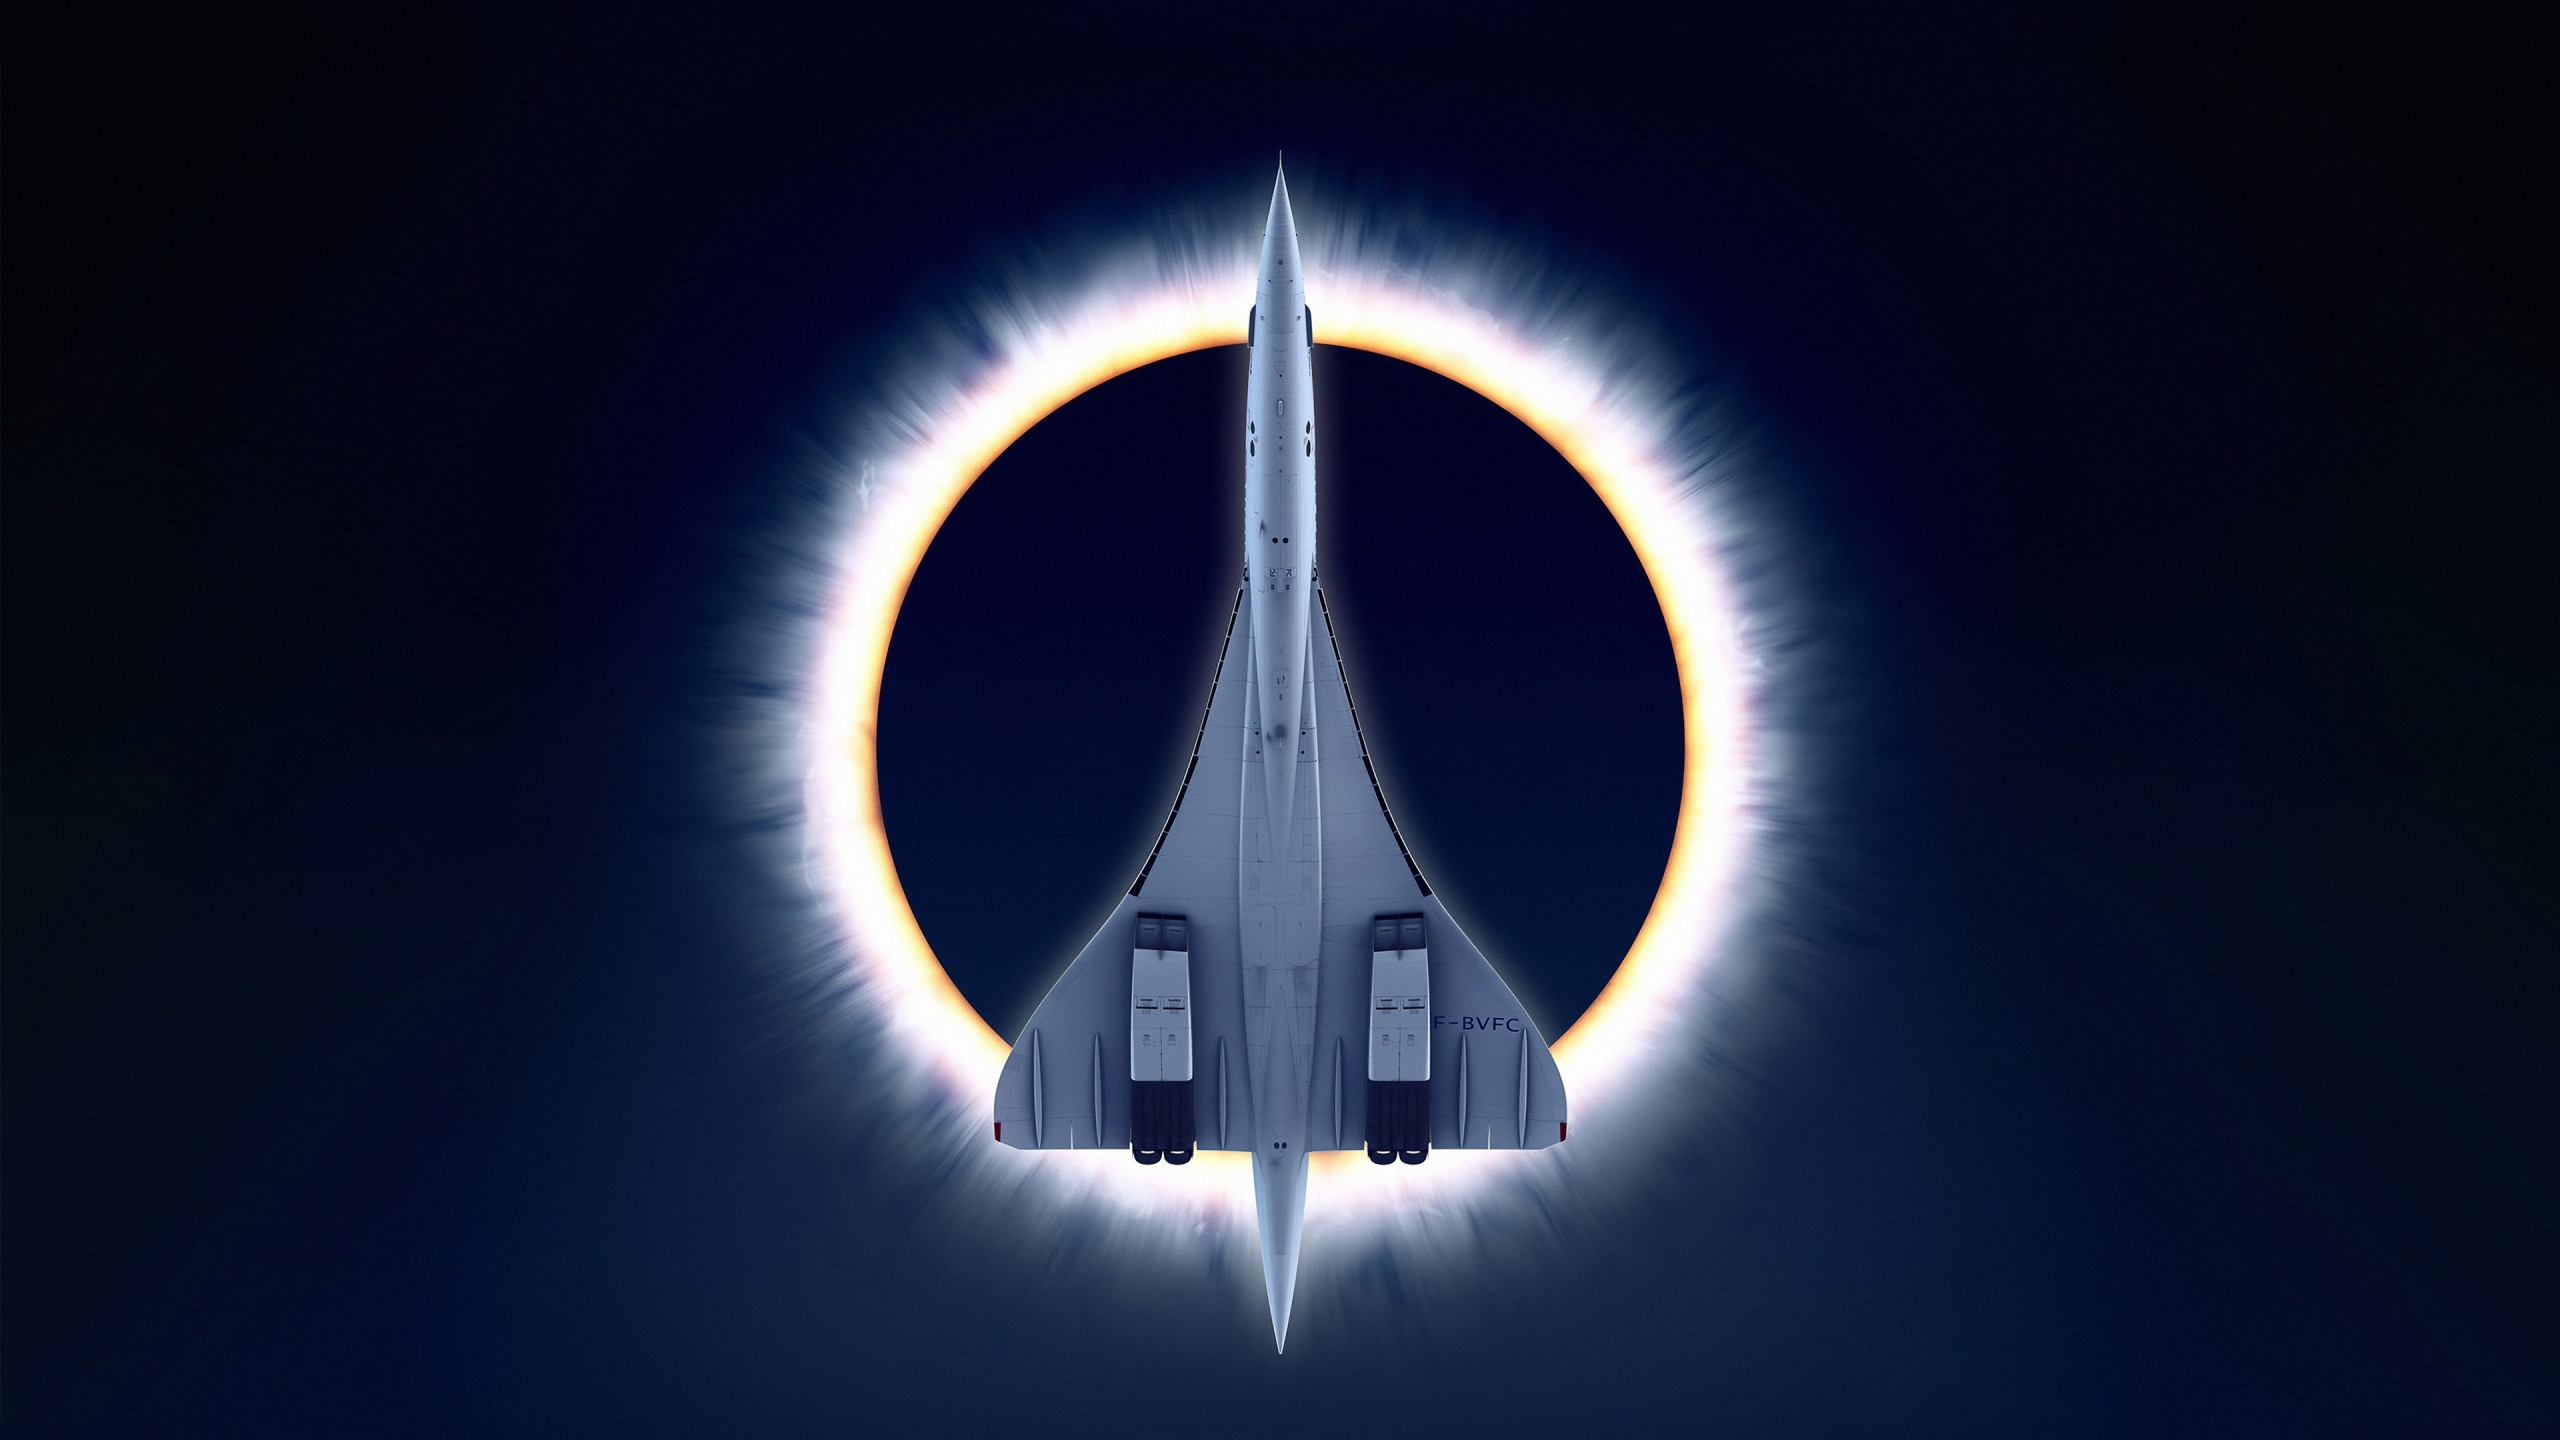 Concorde Carre, eclipse, airplane, moon, aircraft, 2560x1440 wallpaper